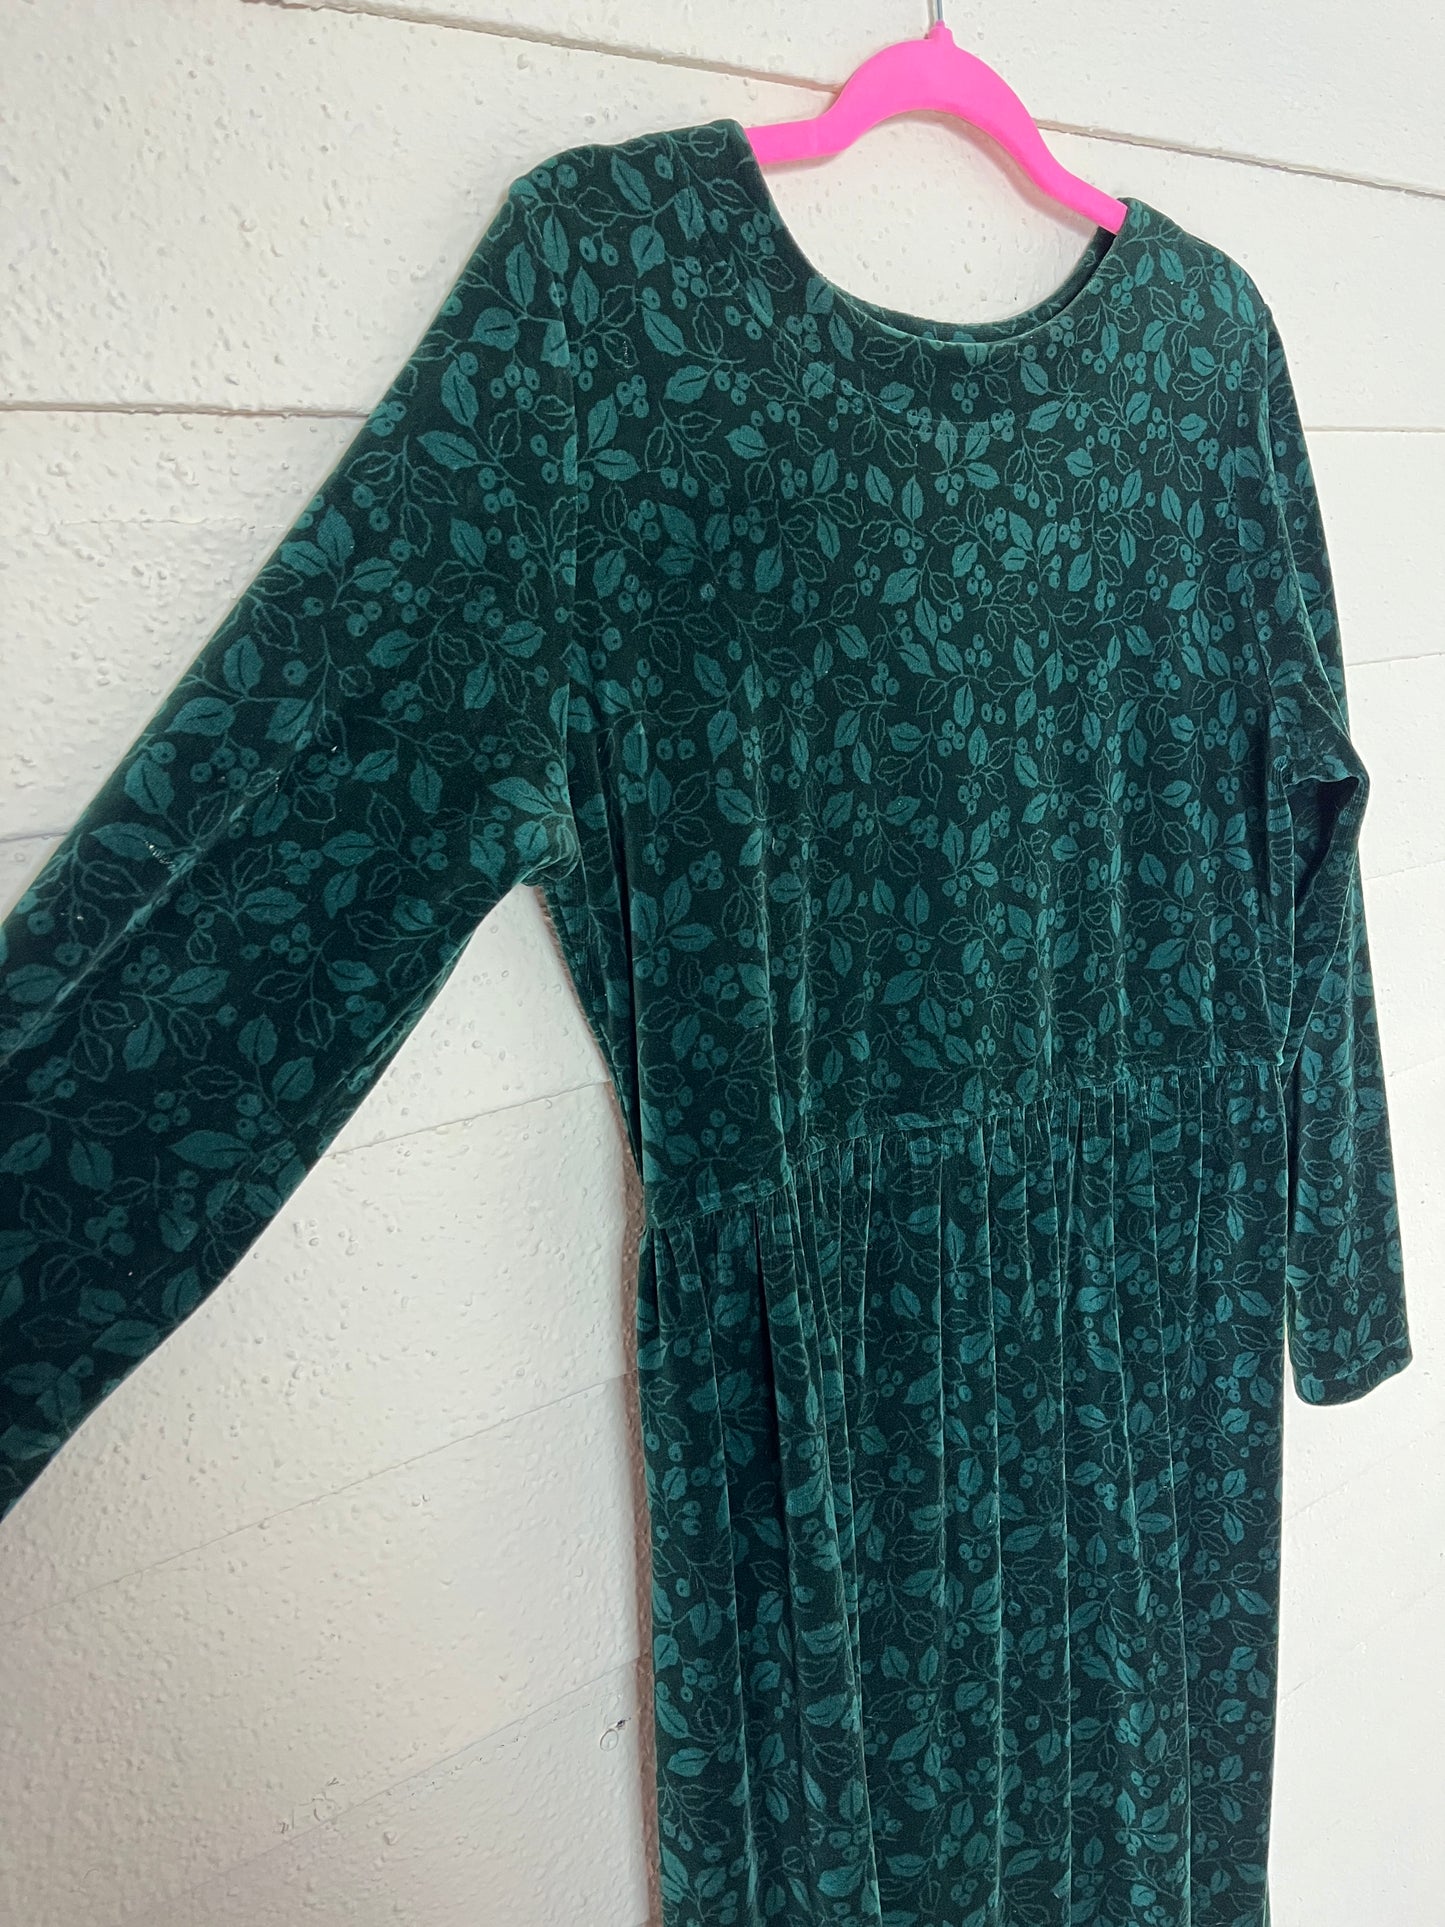 1990s LL BEAN HUNTER GREEN VELVET LONG SLEEVE MAXI DRESS WITH HOLLY PATTERN - size med to large